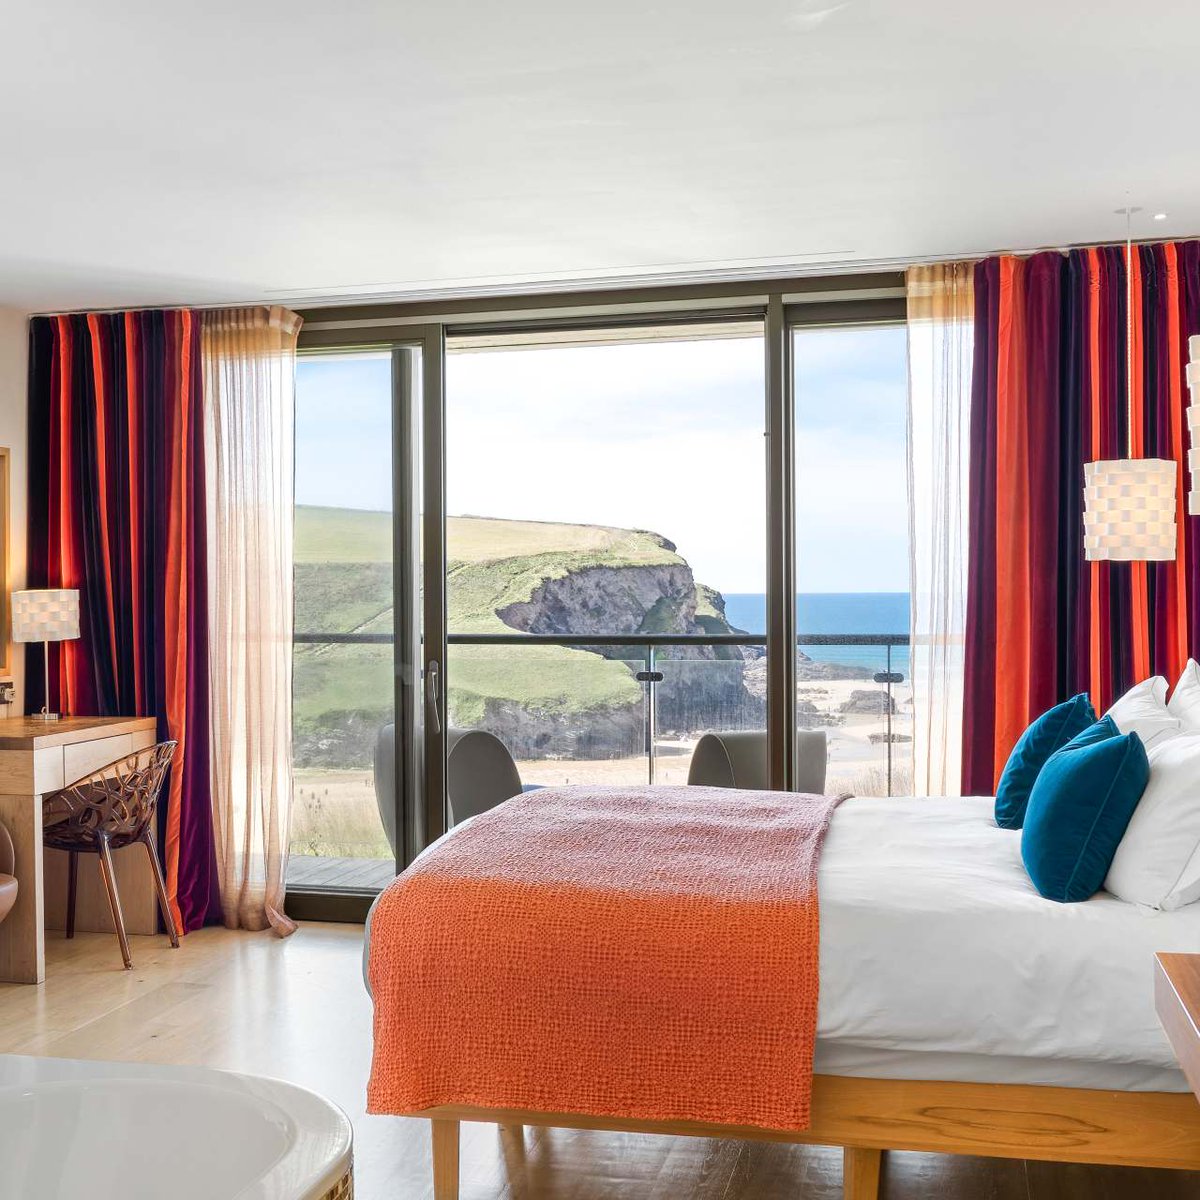 There’s no compromise on modern style and comfort at @thescarlethotel. Light and spacious with original paintings and sculptures to catch the eye, the décor is drawn from nature, the colours of wildflowers, rock pools and sea mosses. tinyurl.com/2s4tjrse